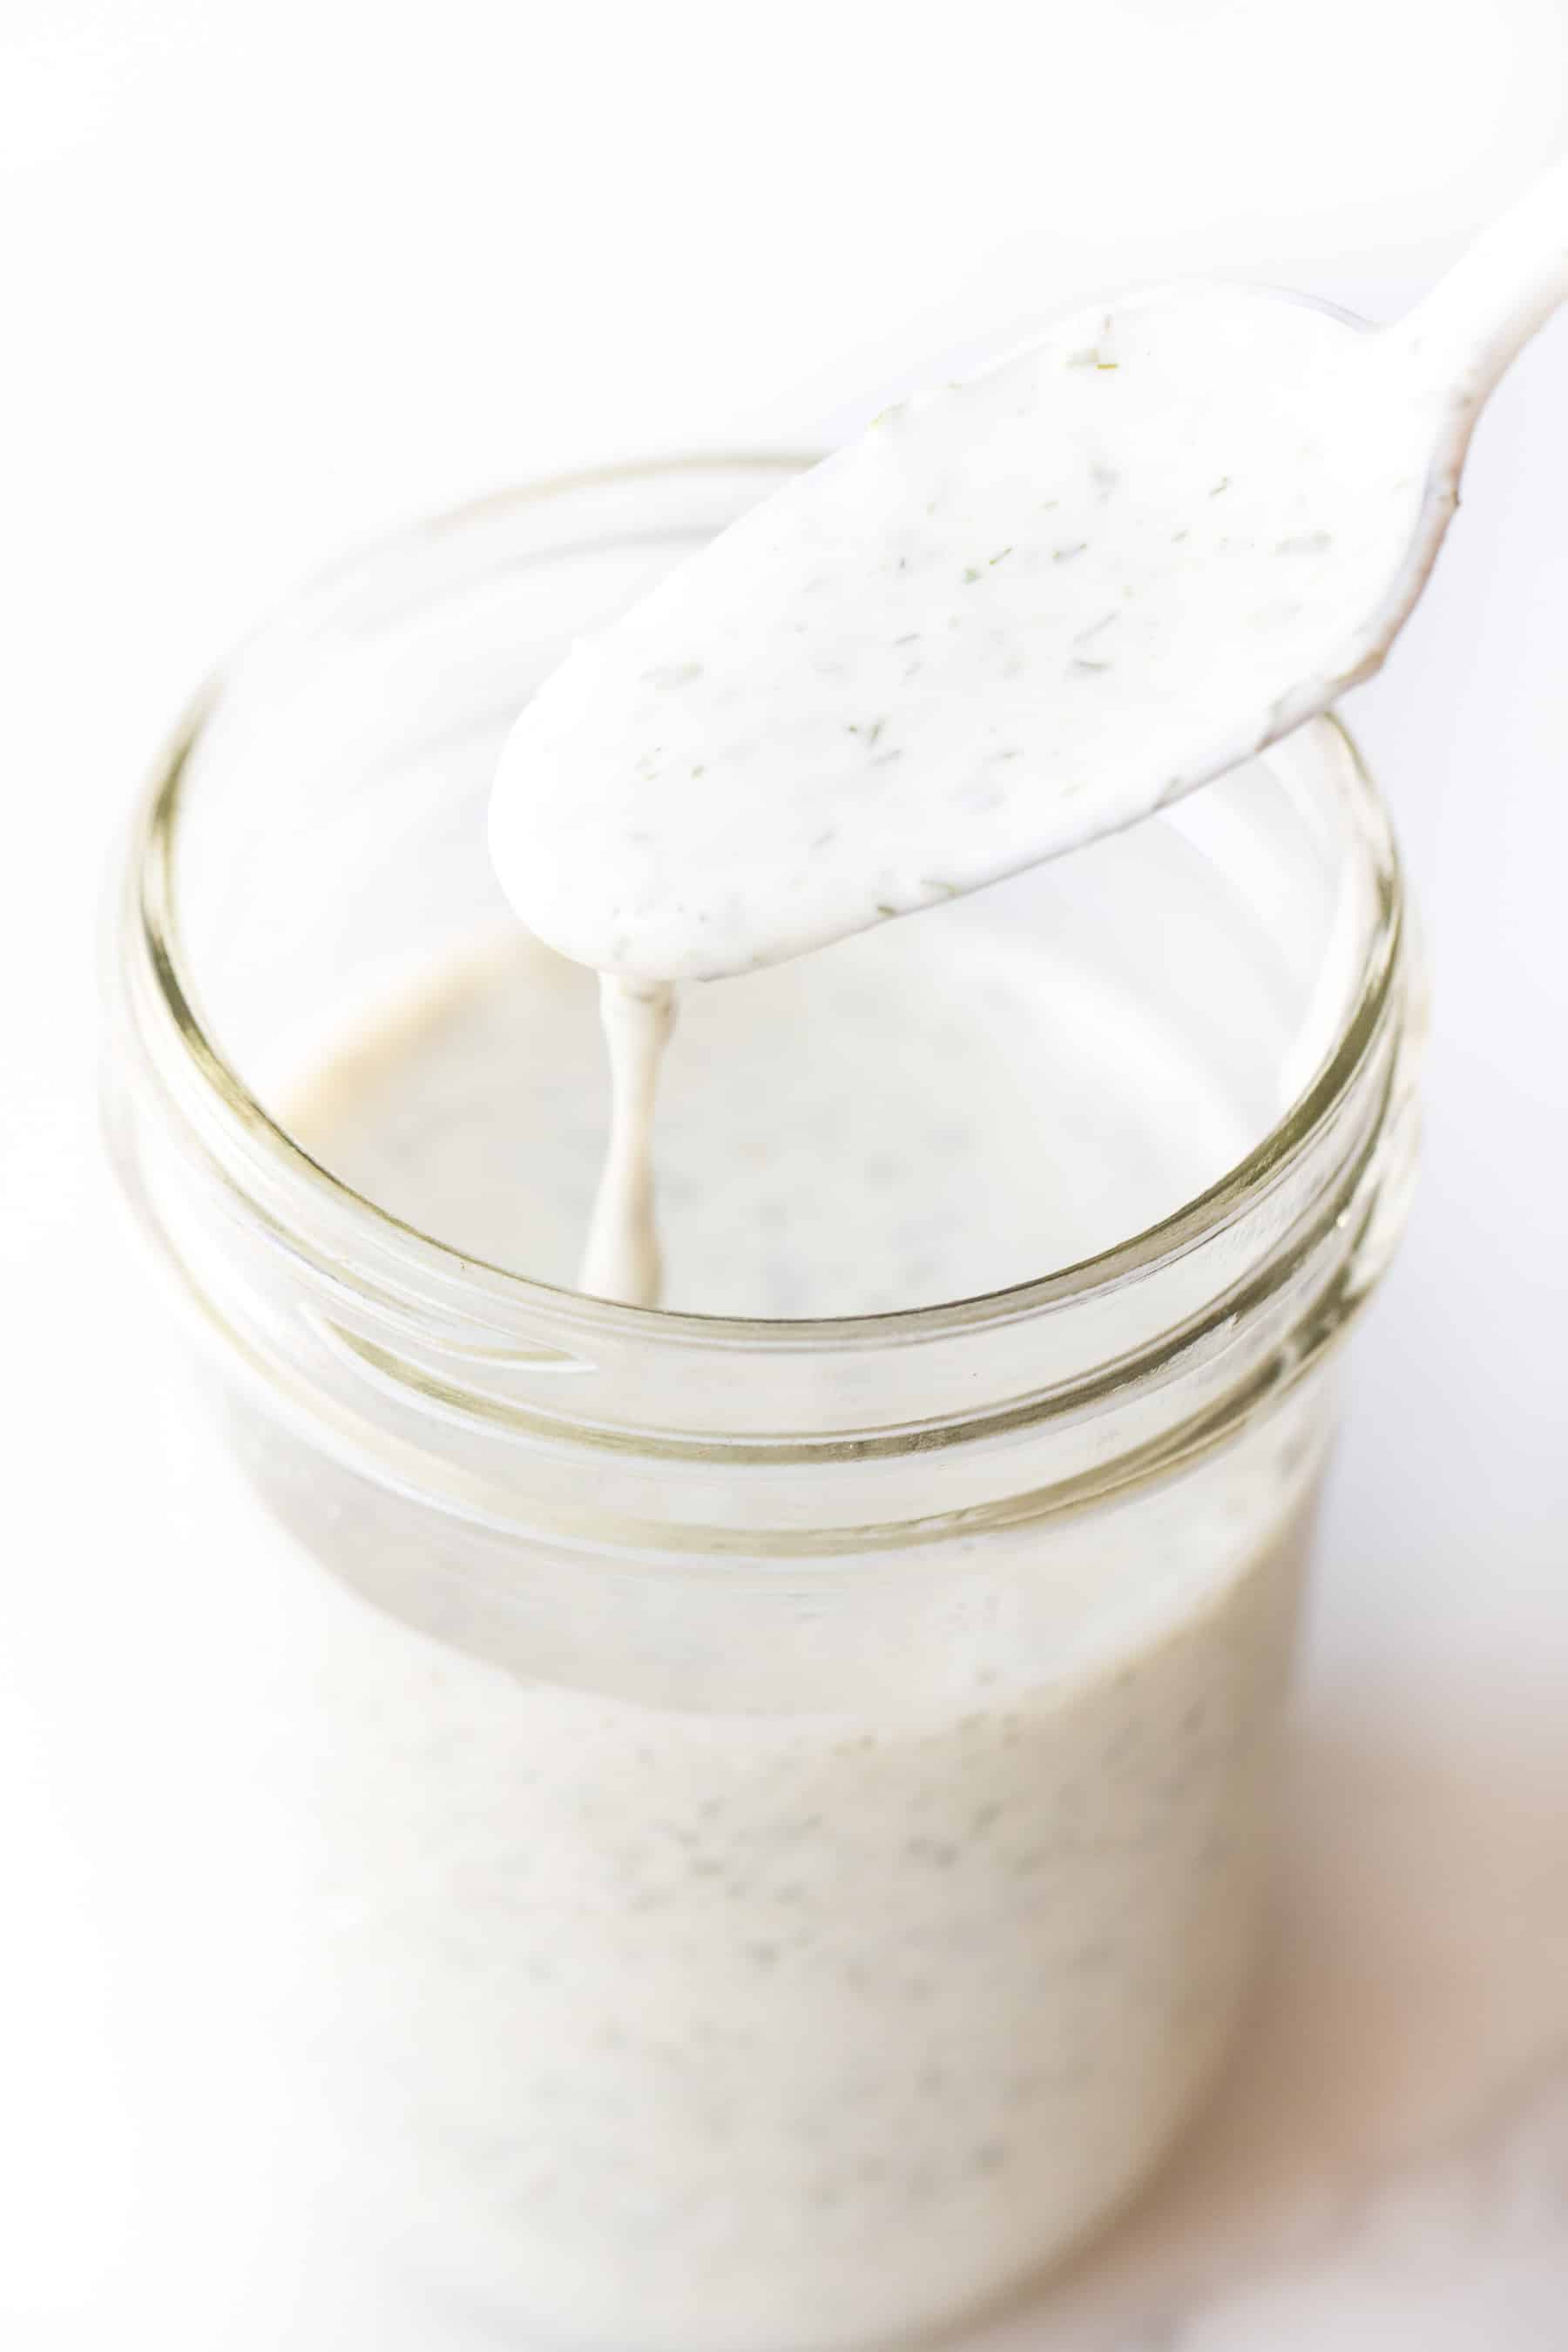 a spoon dripping ranch dressing into a mason jar on a white background